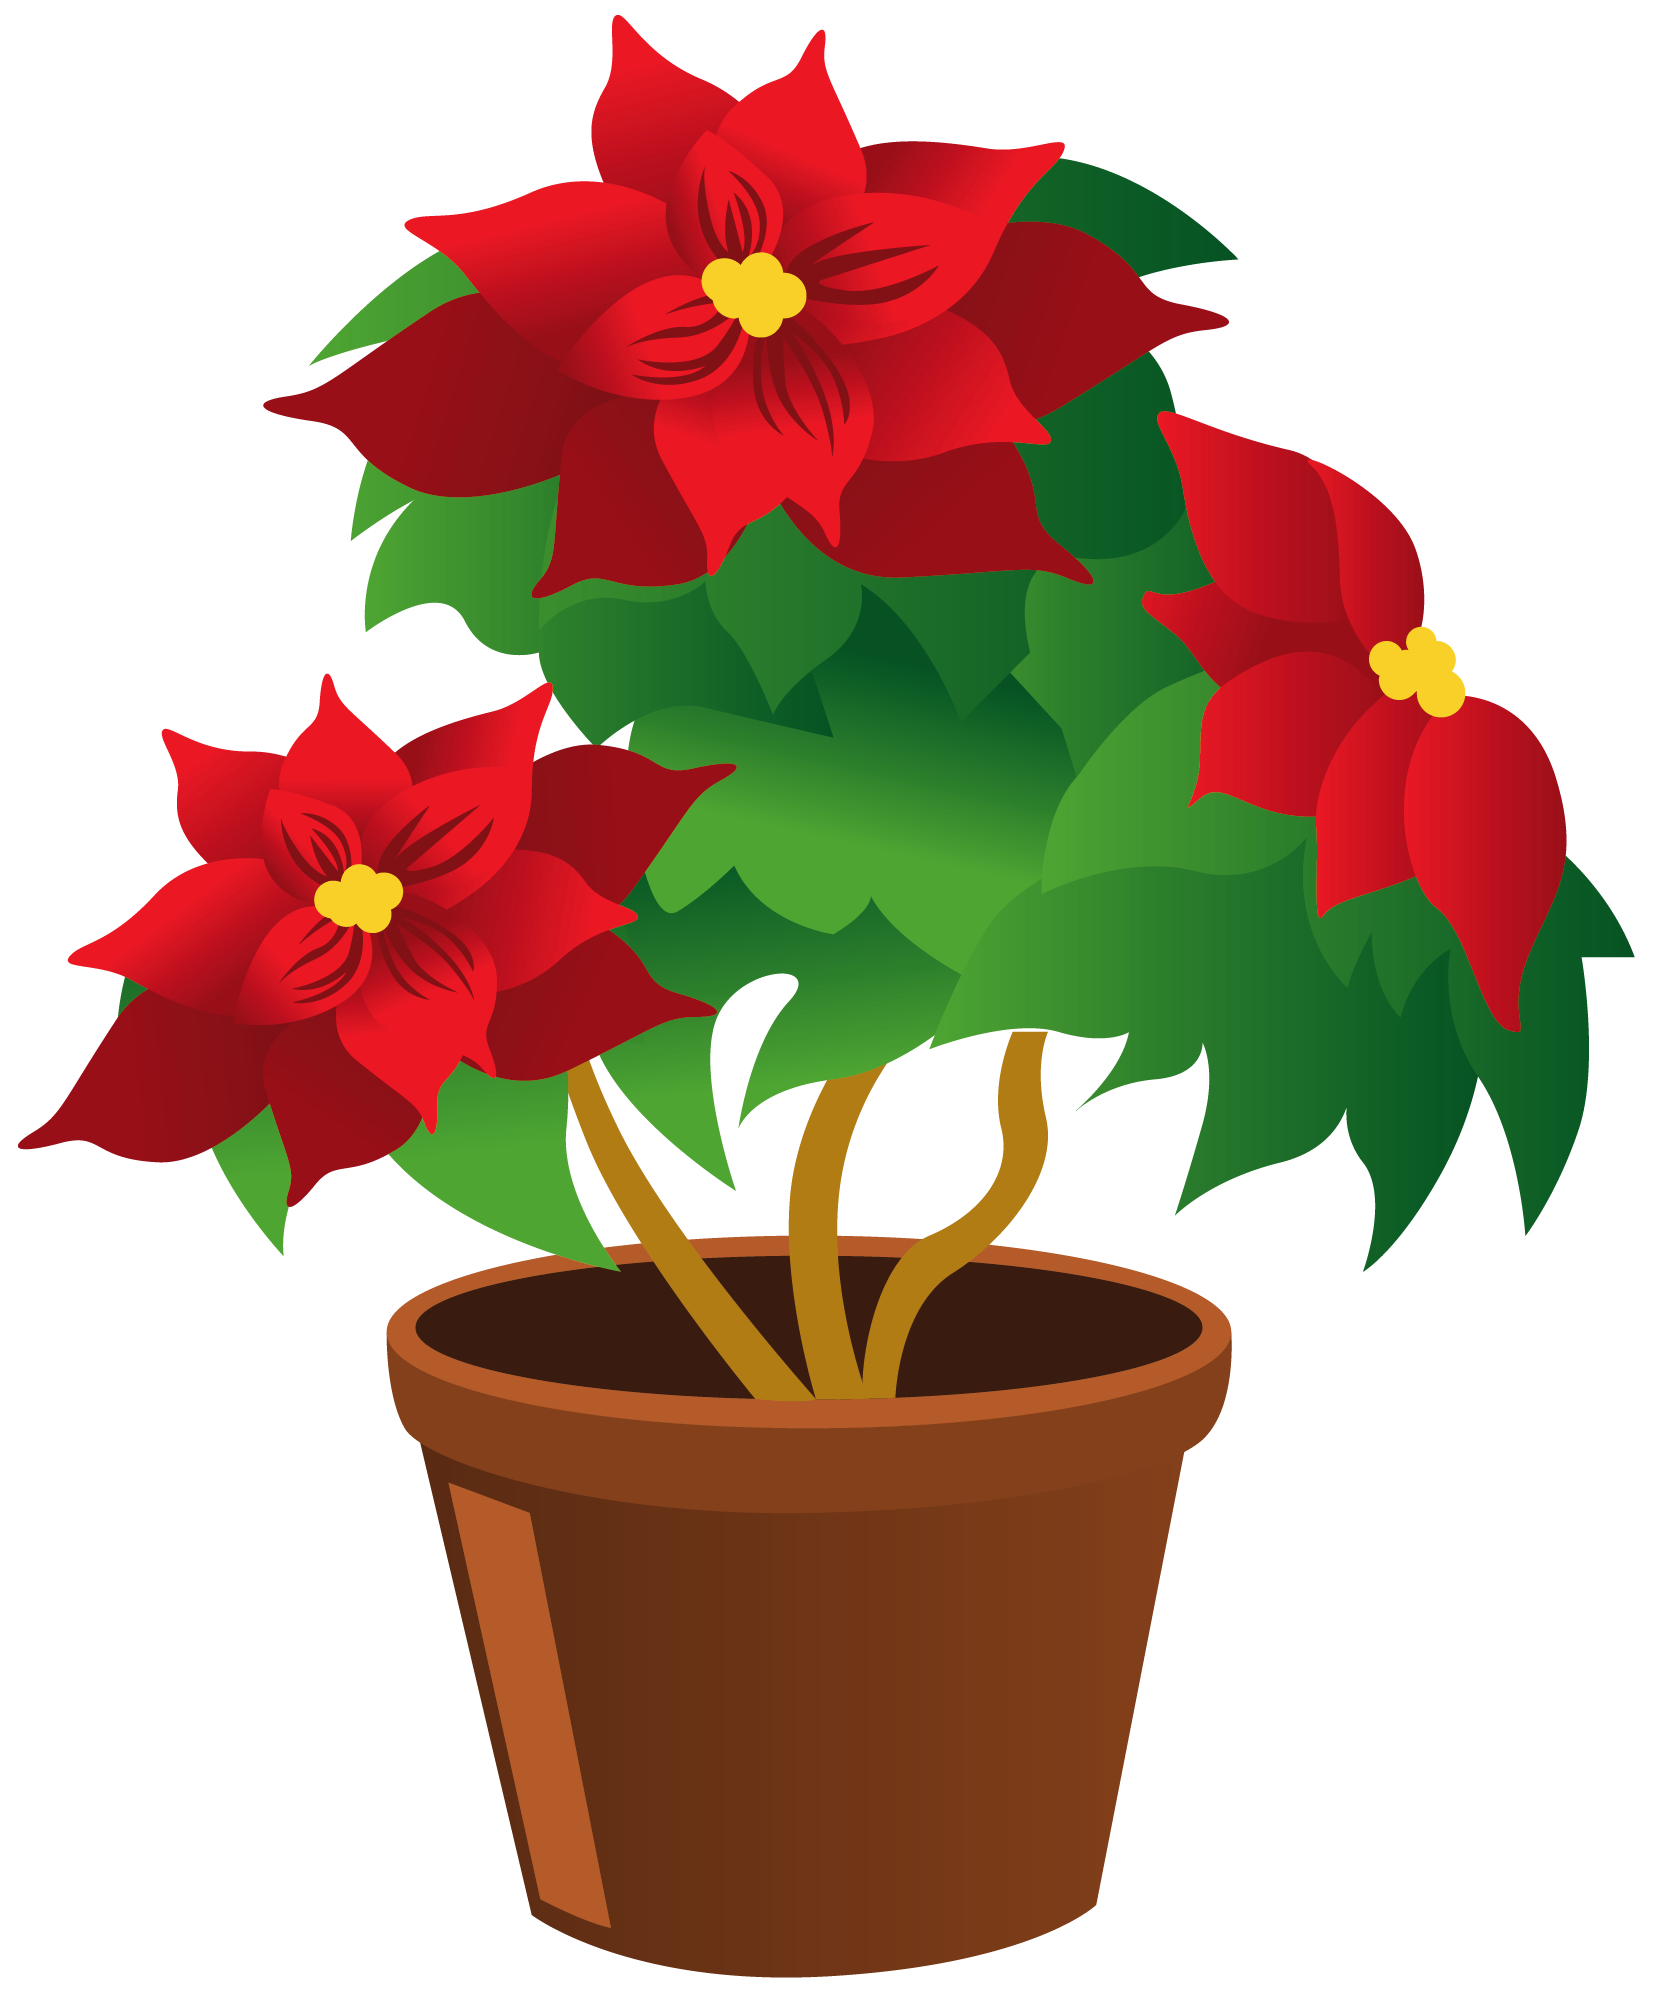 potted plant clip art png